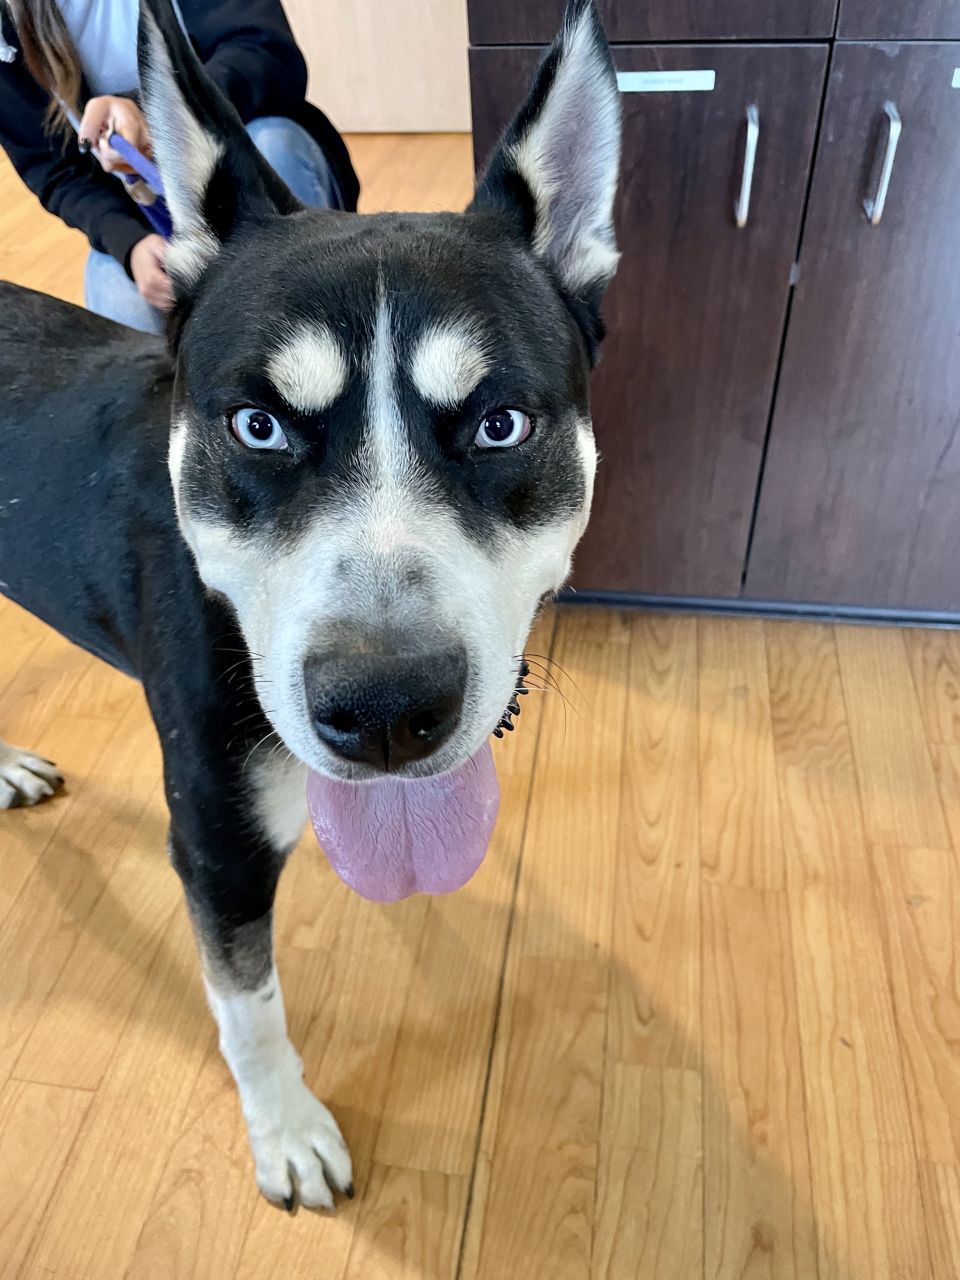 I want to adopt the Husky/Pit mix that came into my work with BBs in his neck. He’s currently up for adoption. His name is Curtis but I would change it to Prince.